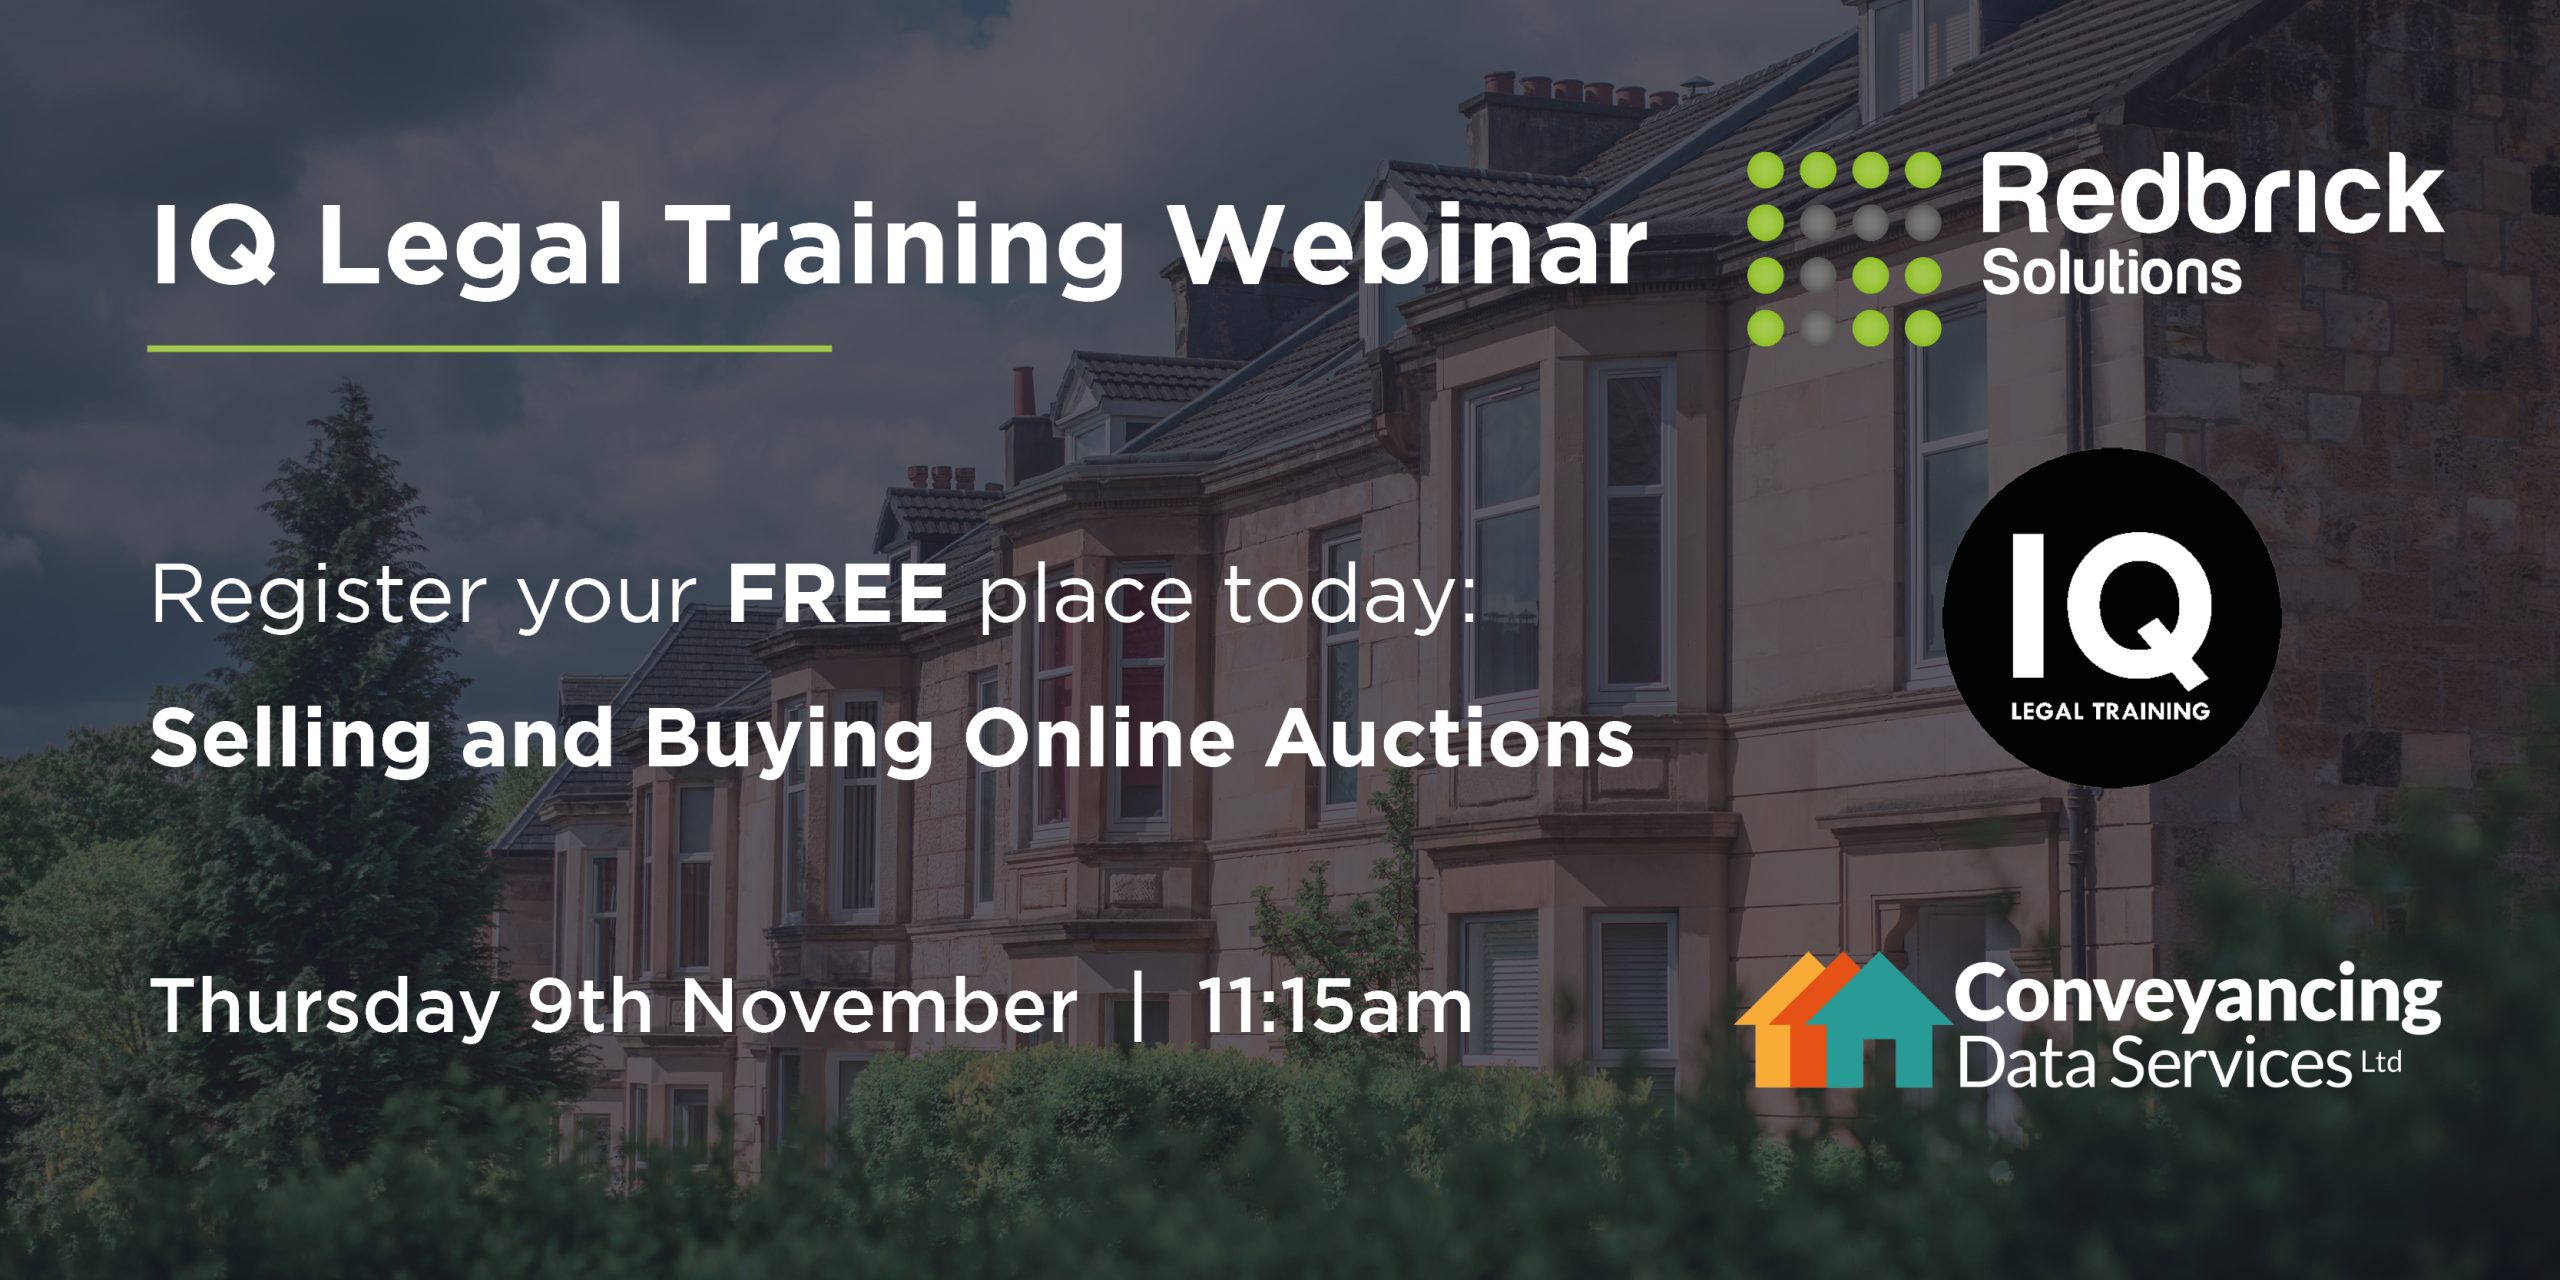 IQ Legal Training Webinar | Selling and Buying Online Auctions